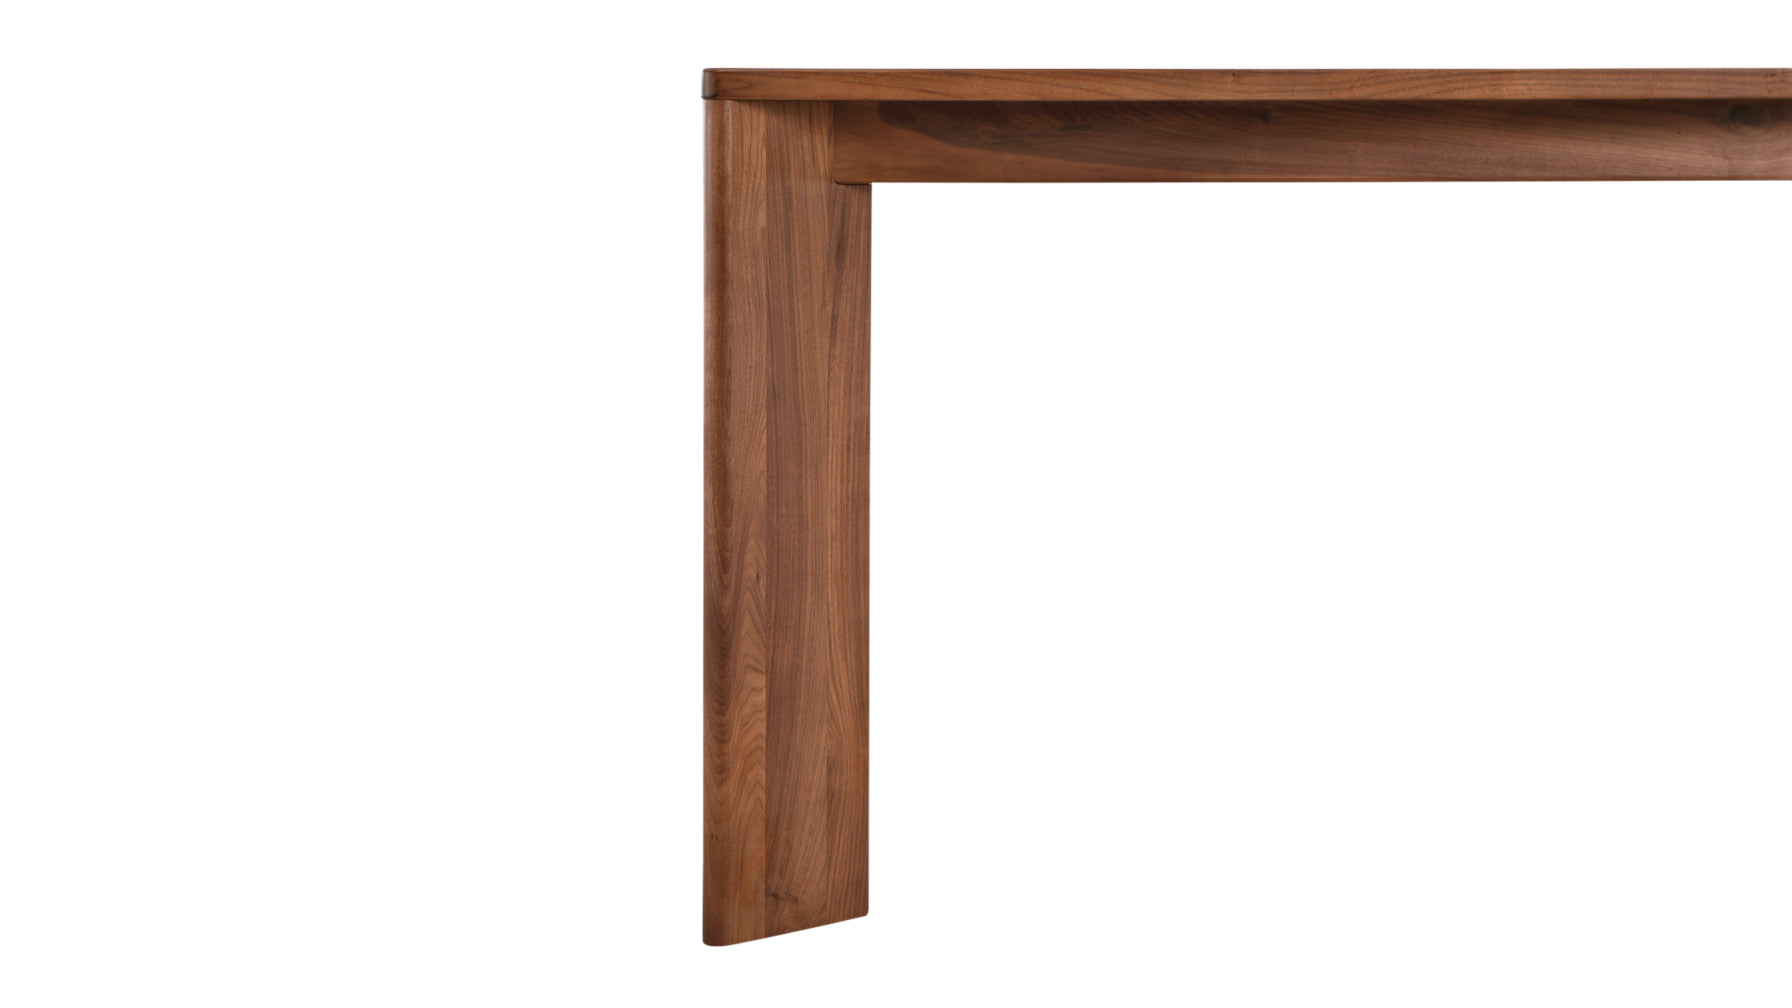 Frame Dining Table, Seats 6-8 People, American Walnut - Image 7